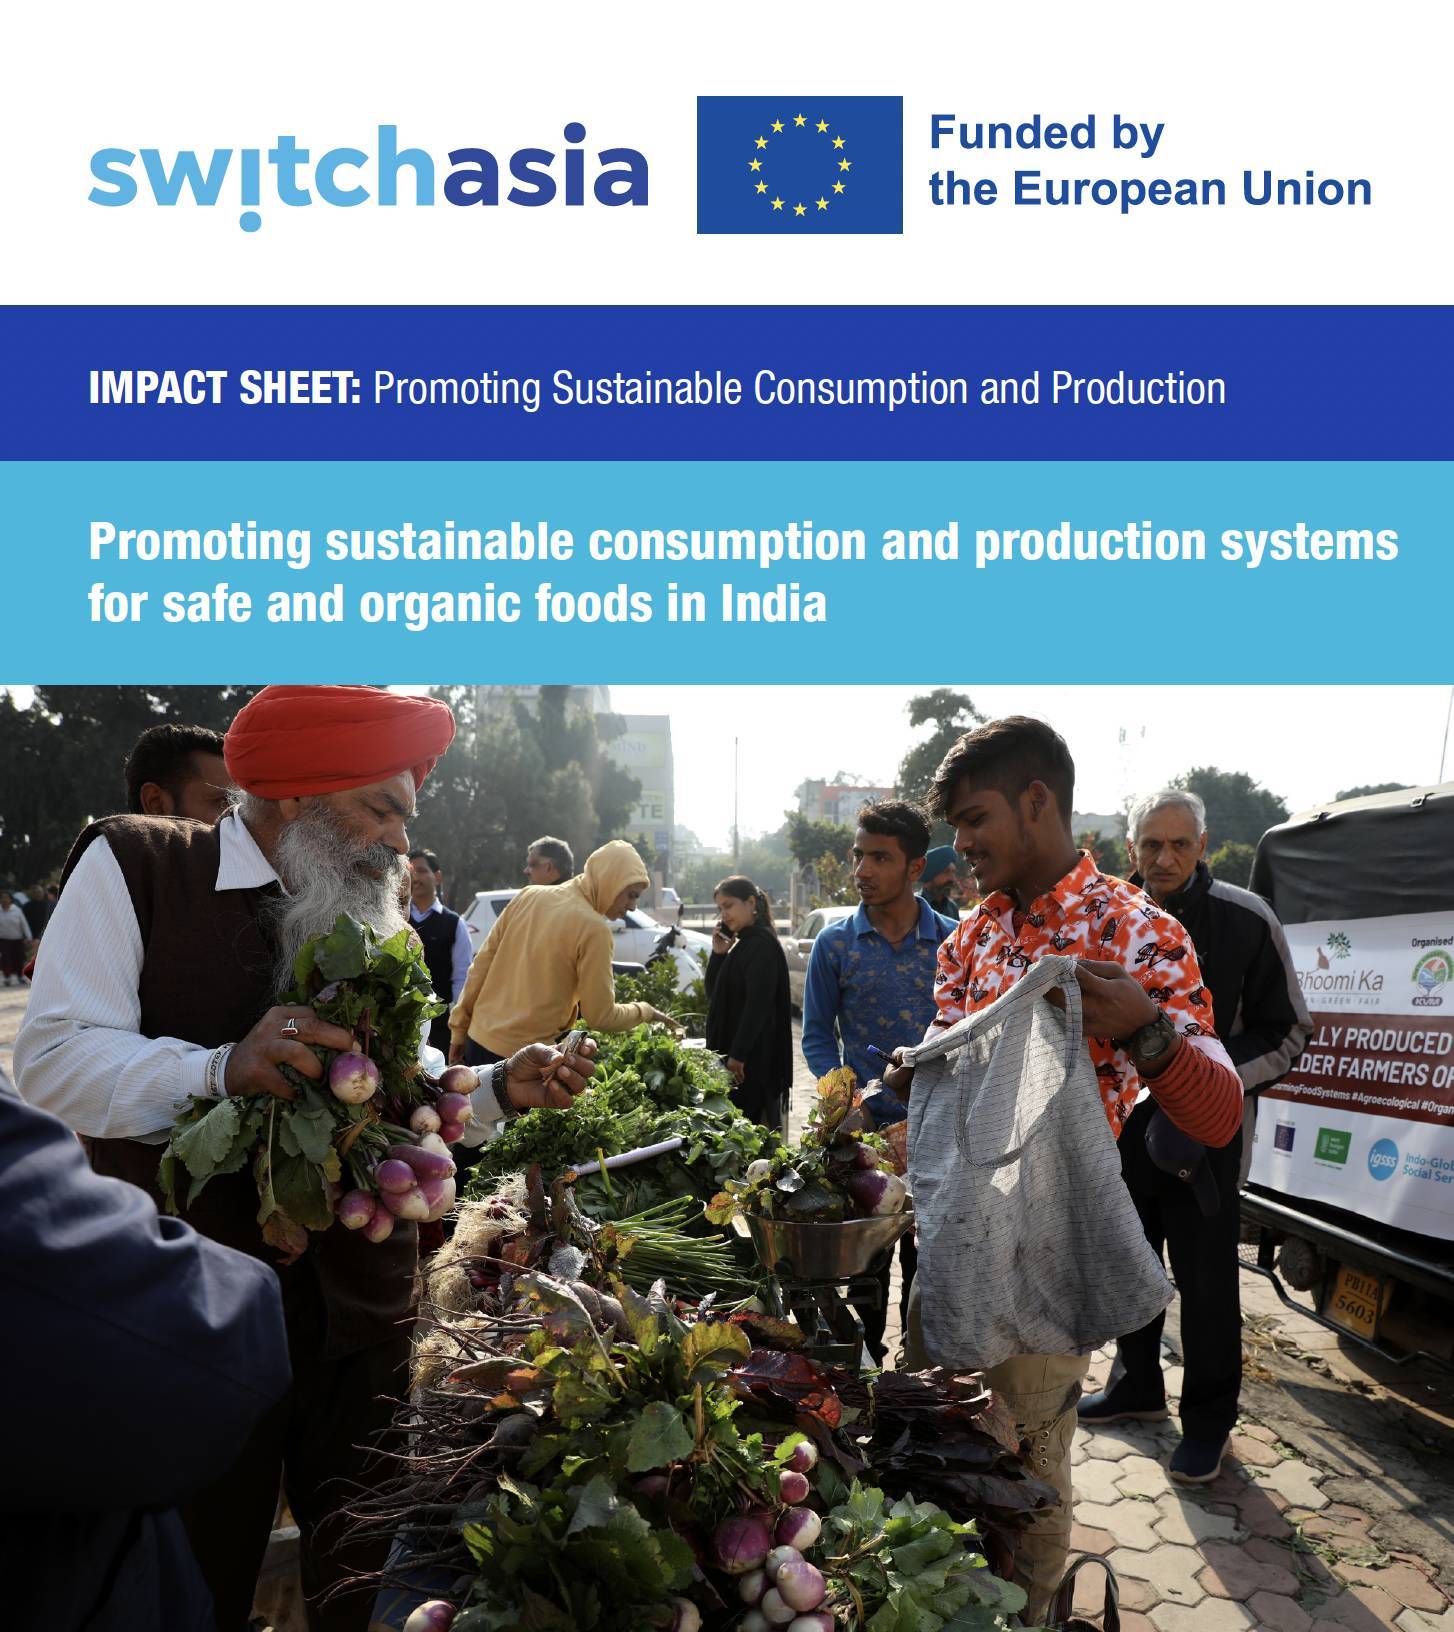 Impact Sheet: Promoting sustainable consumption and production systems for safe and organic foods in...